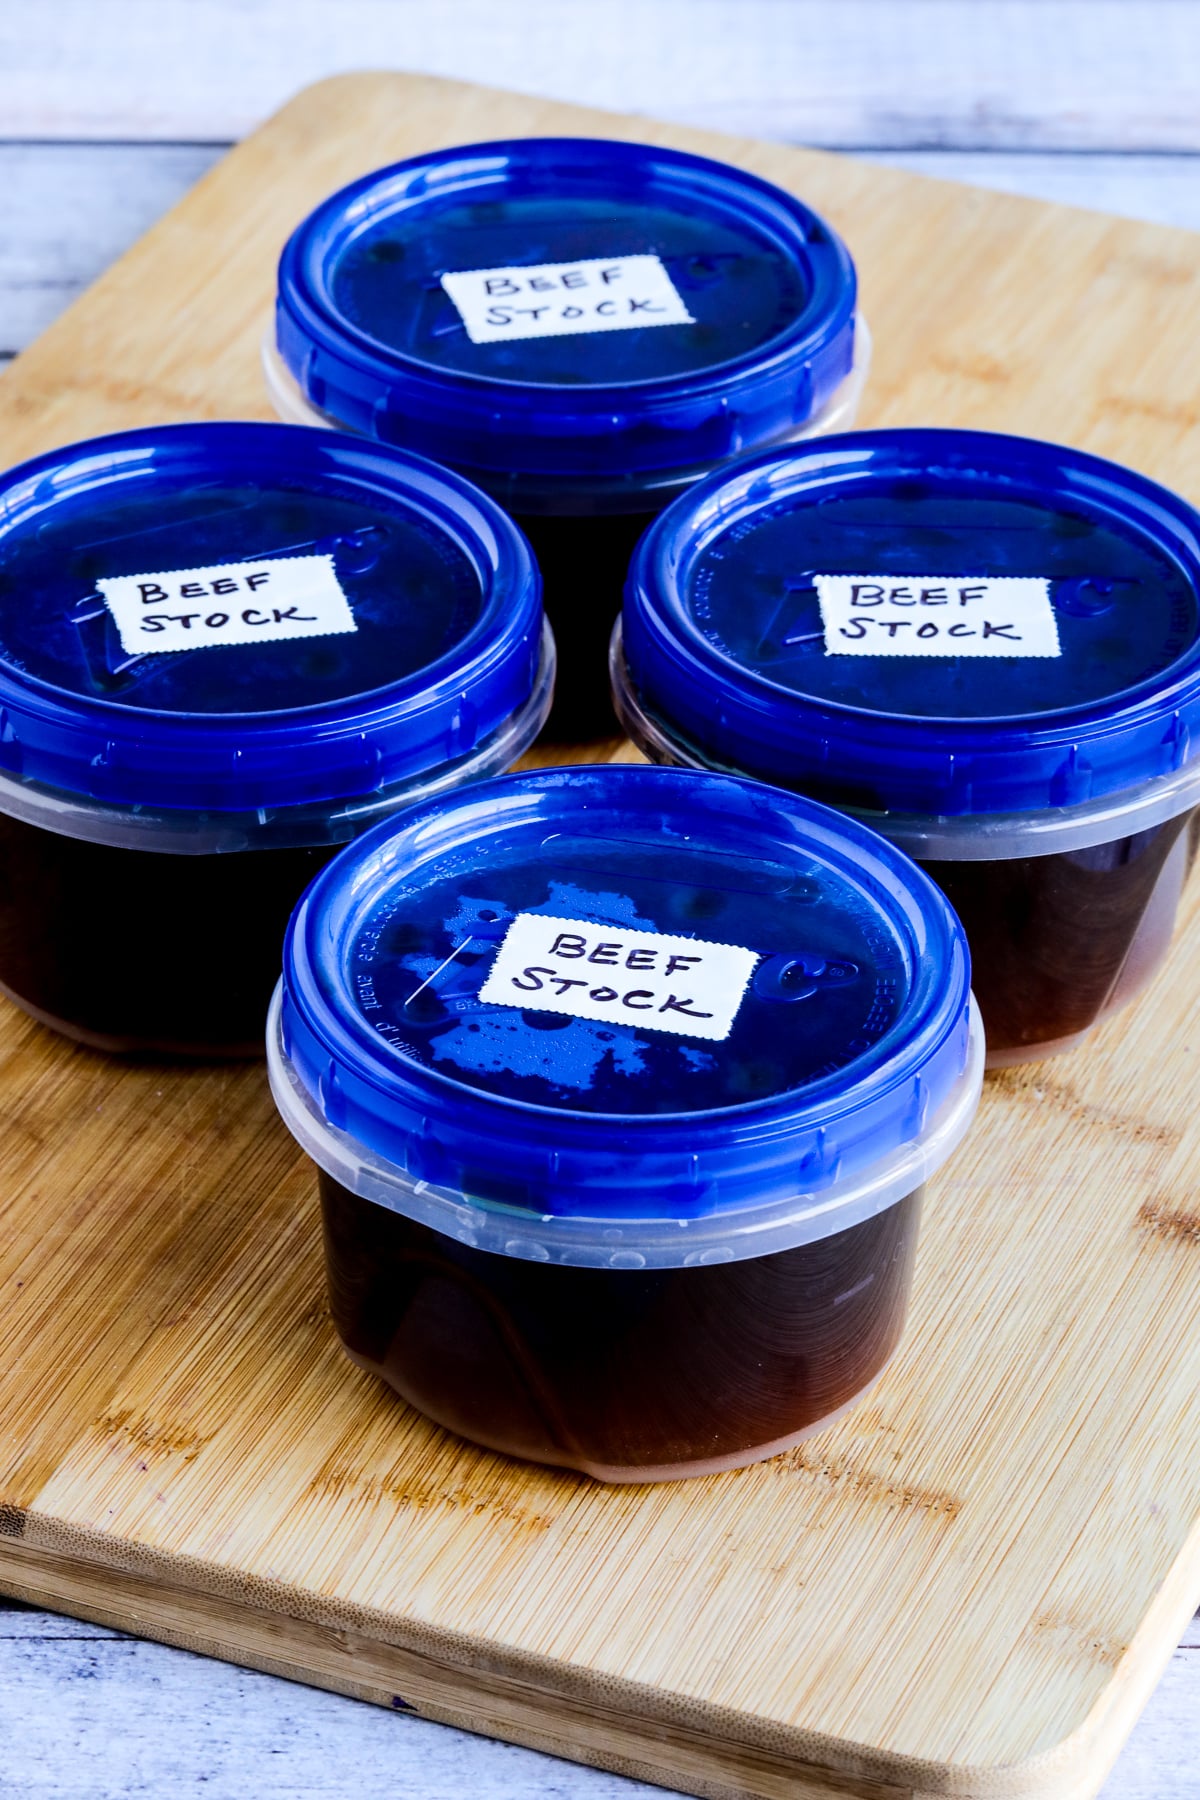 How to Make Beef Stock showing stock in freezer containers.